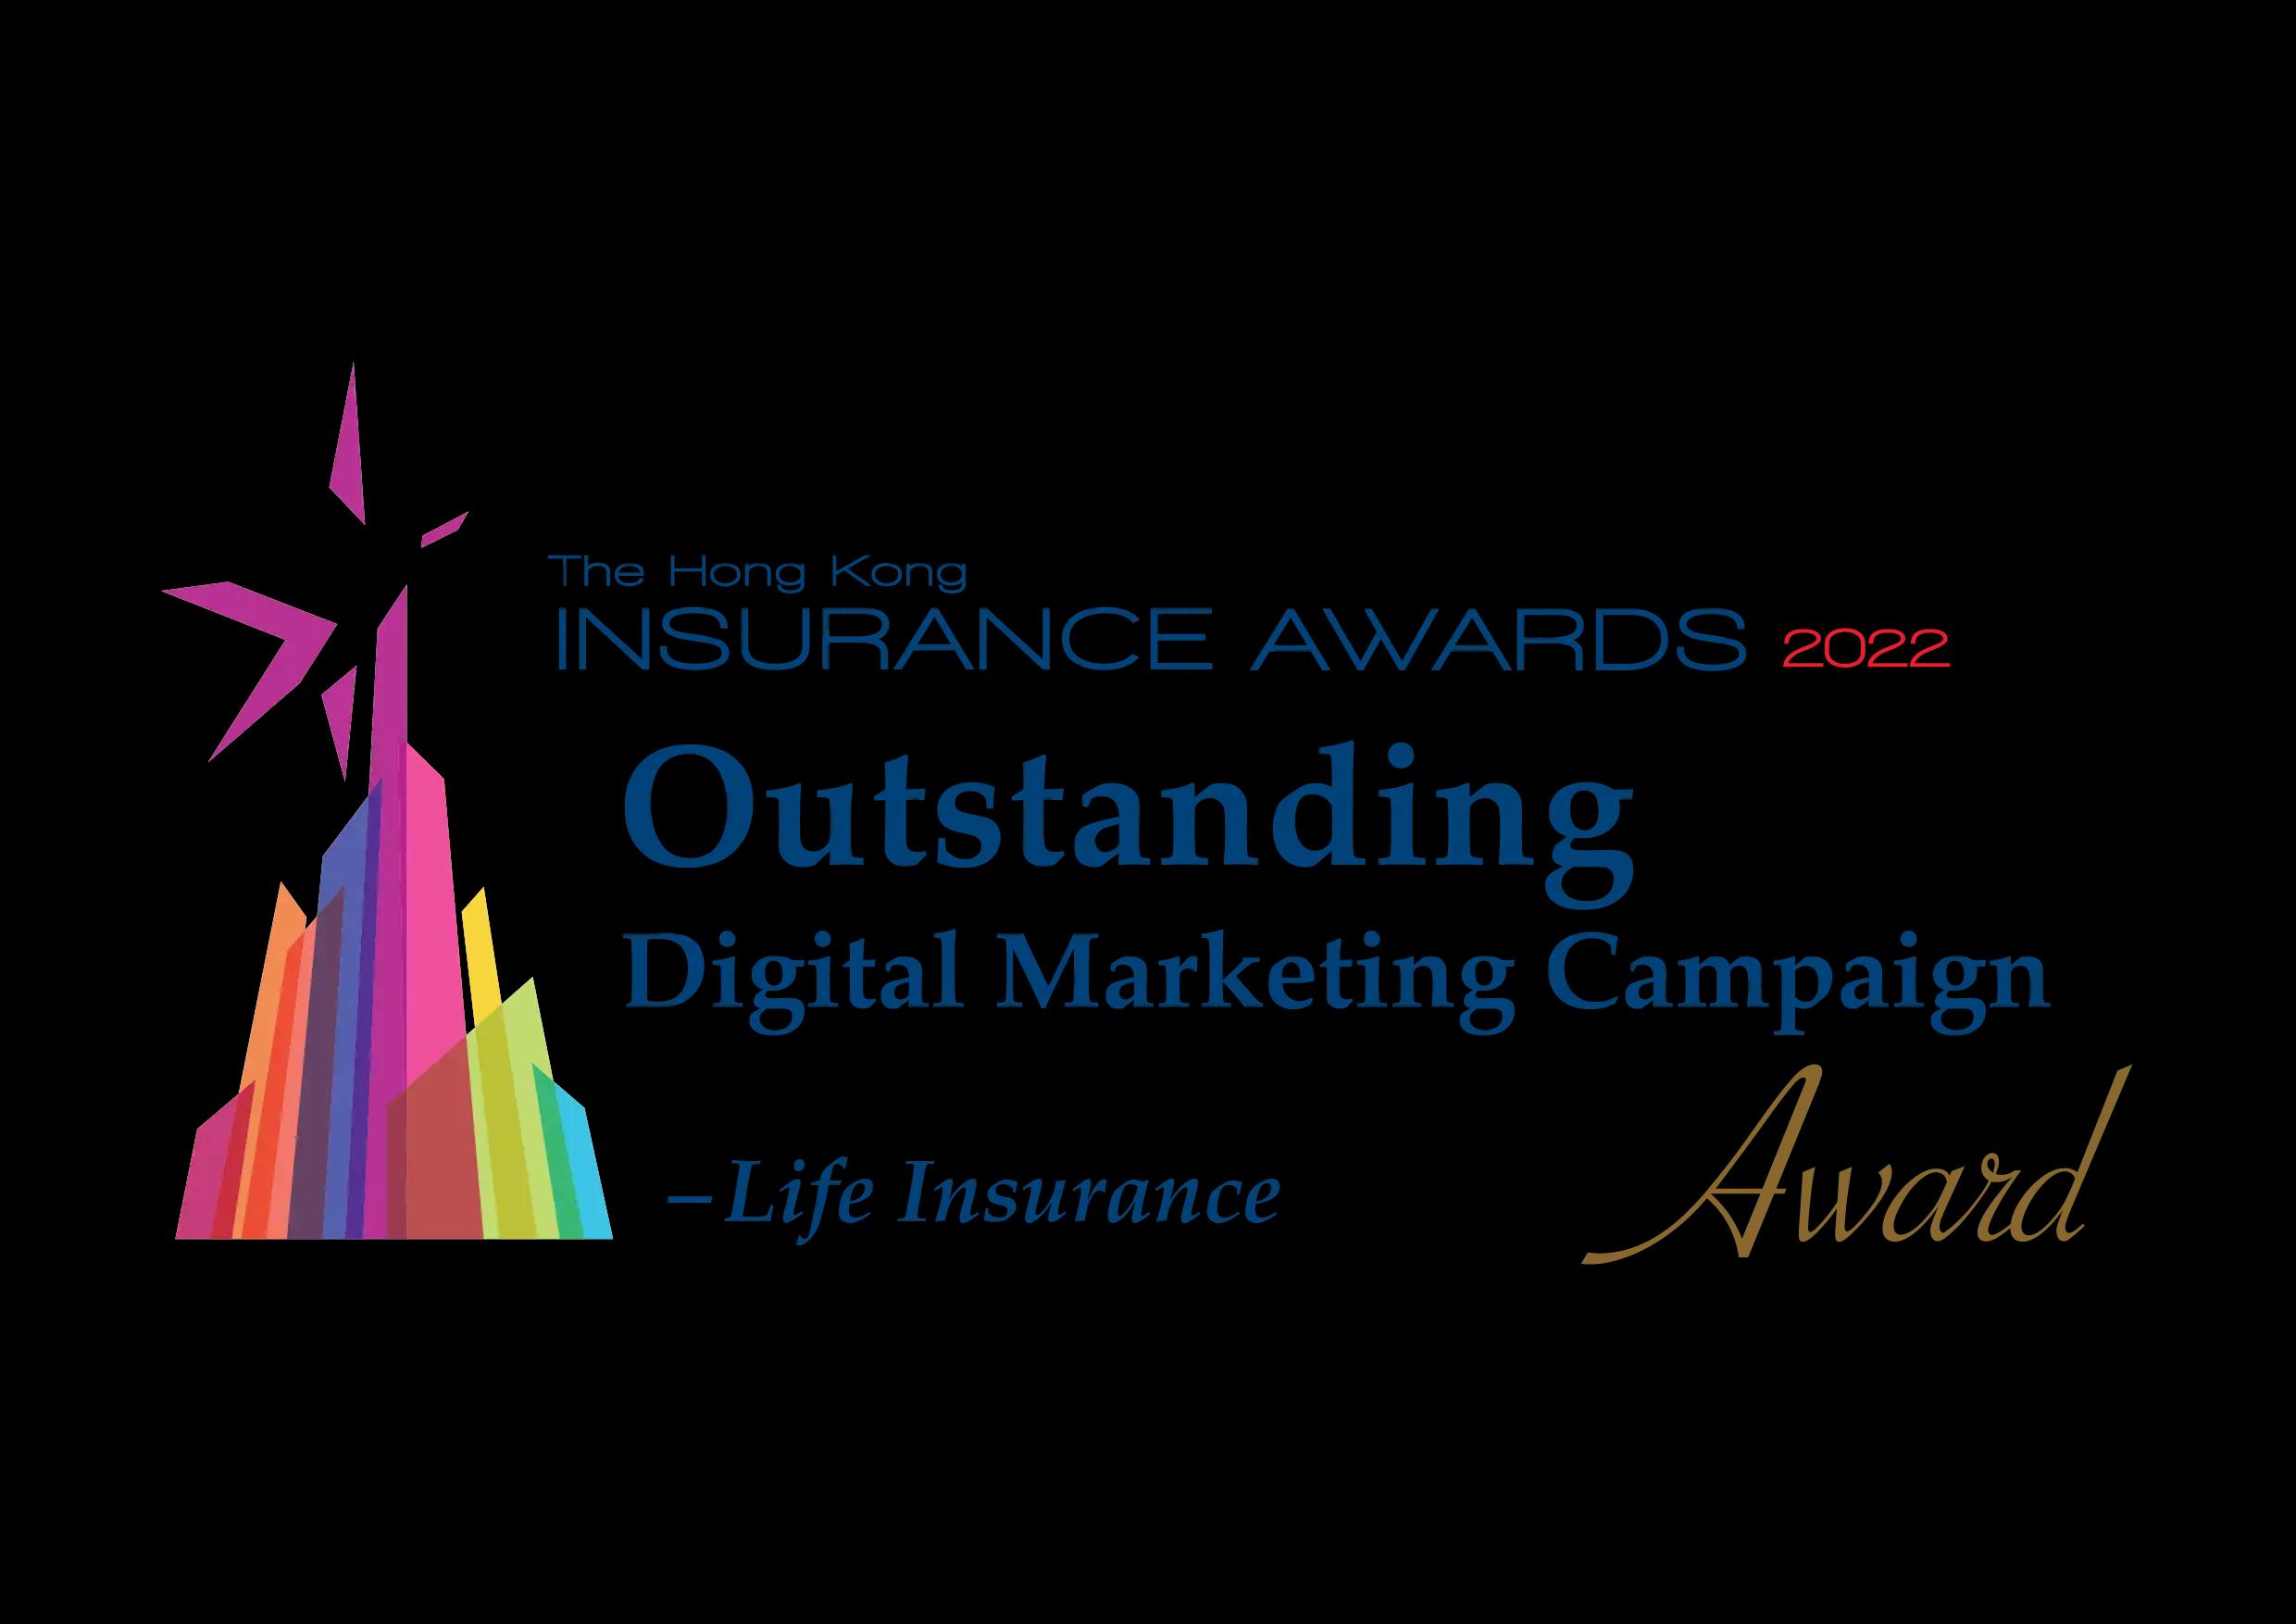 FWD received The Hong Kong Insurance Awards 2022 Outstanding Digital Marketing Campaign Award (Life Insurance)